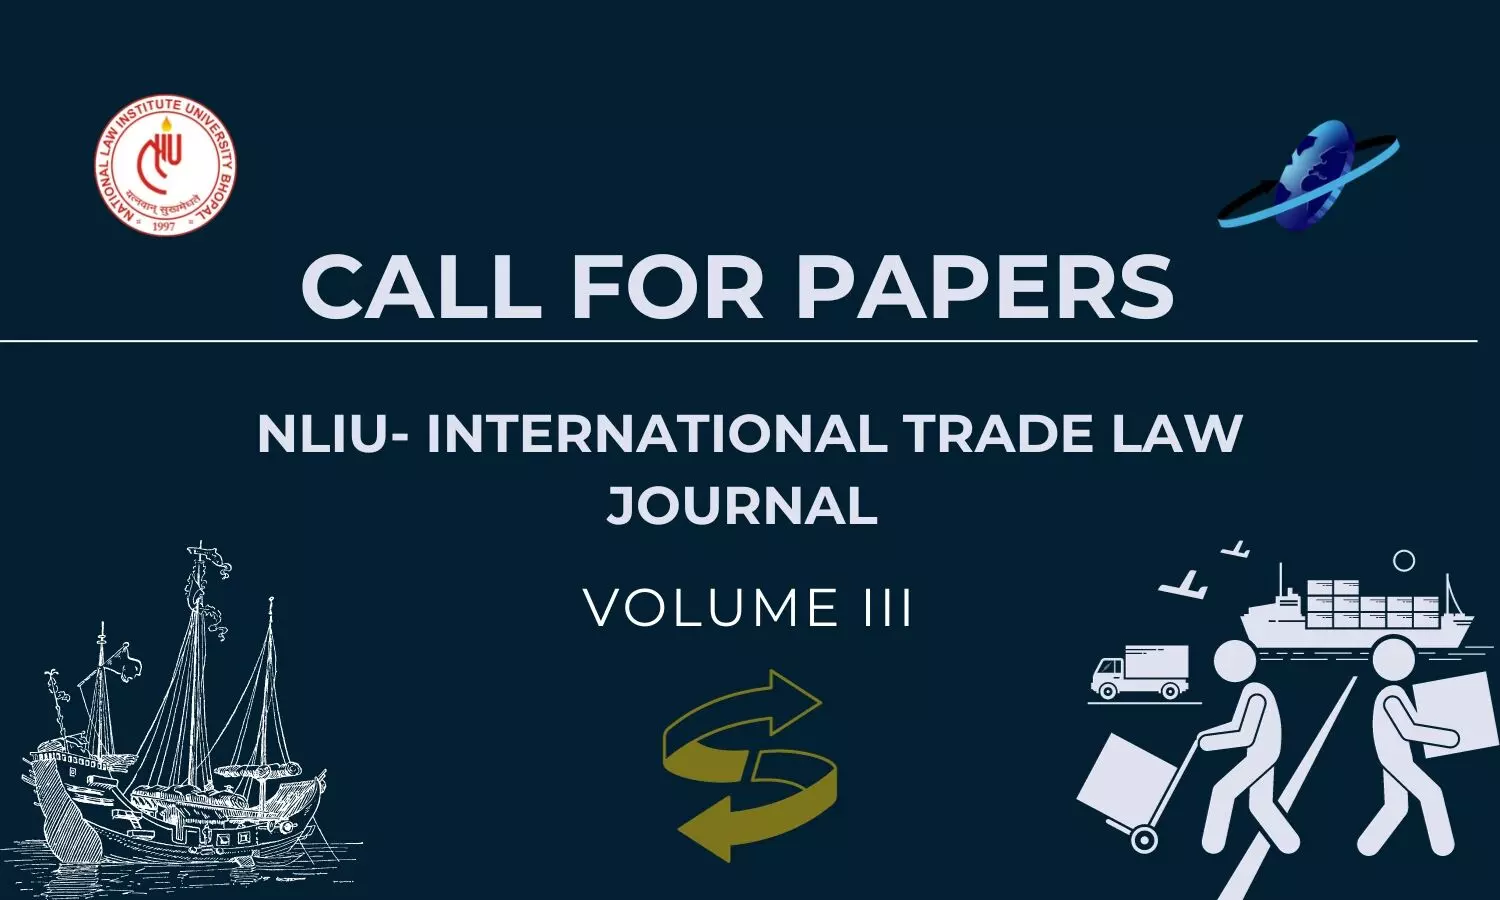 Call for Papers: NLIU International Trade Law Journal Volume III